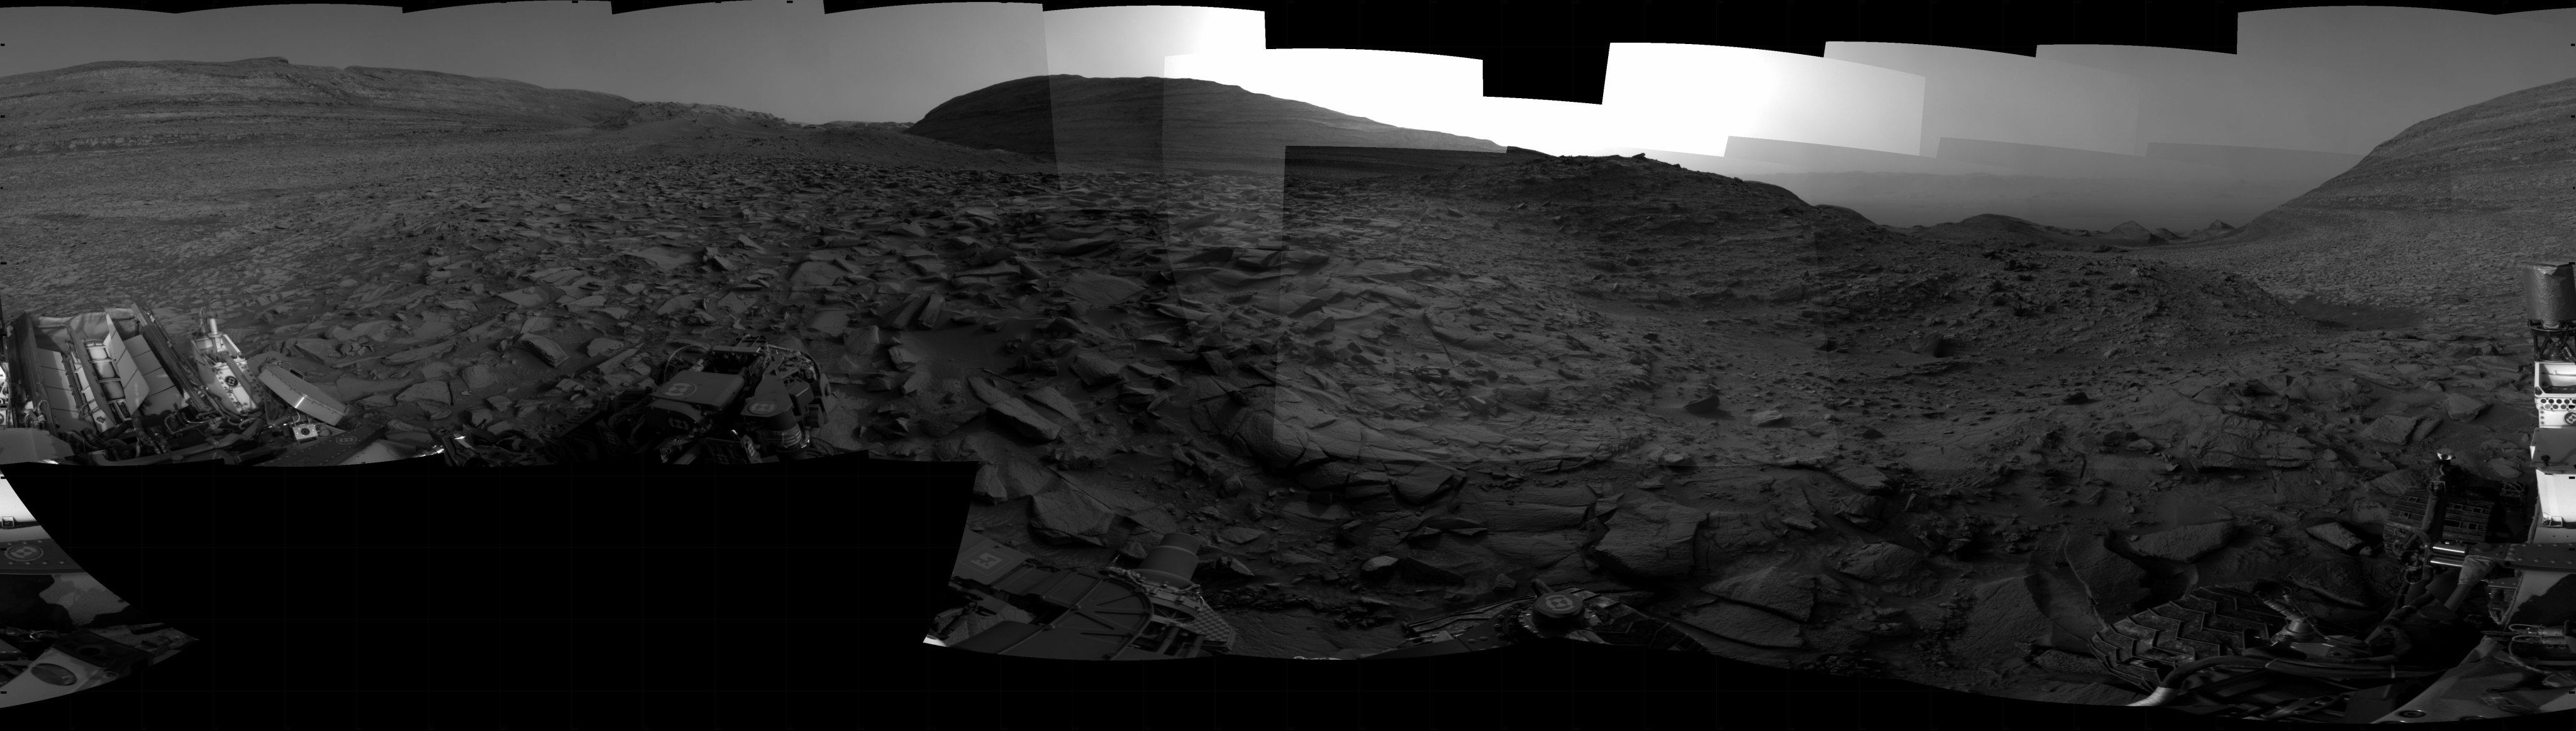 Curiosity took the images on May 10, 2024, Sol 4180 of the Mars Science Laboratory mission at drive 924, site number 107. The local mean solar time for the image exposures was 4 PM.